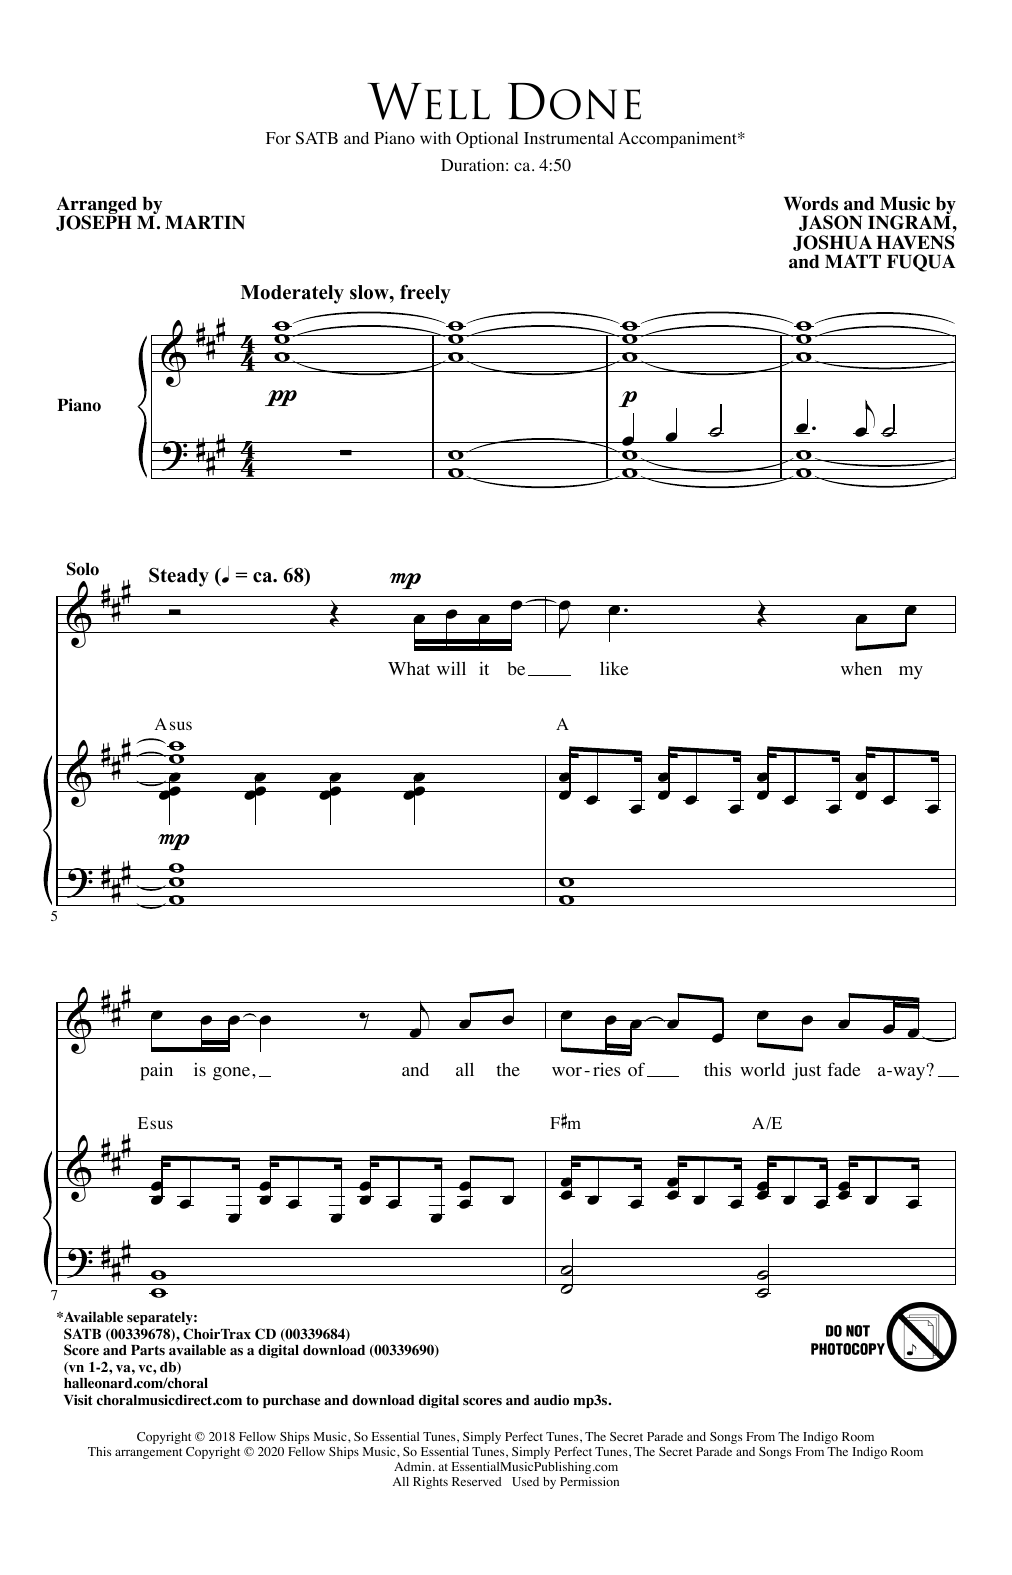 Download The Afters Well Done (arr. Joseph M. Martin) Sheet Music